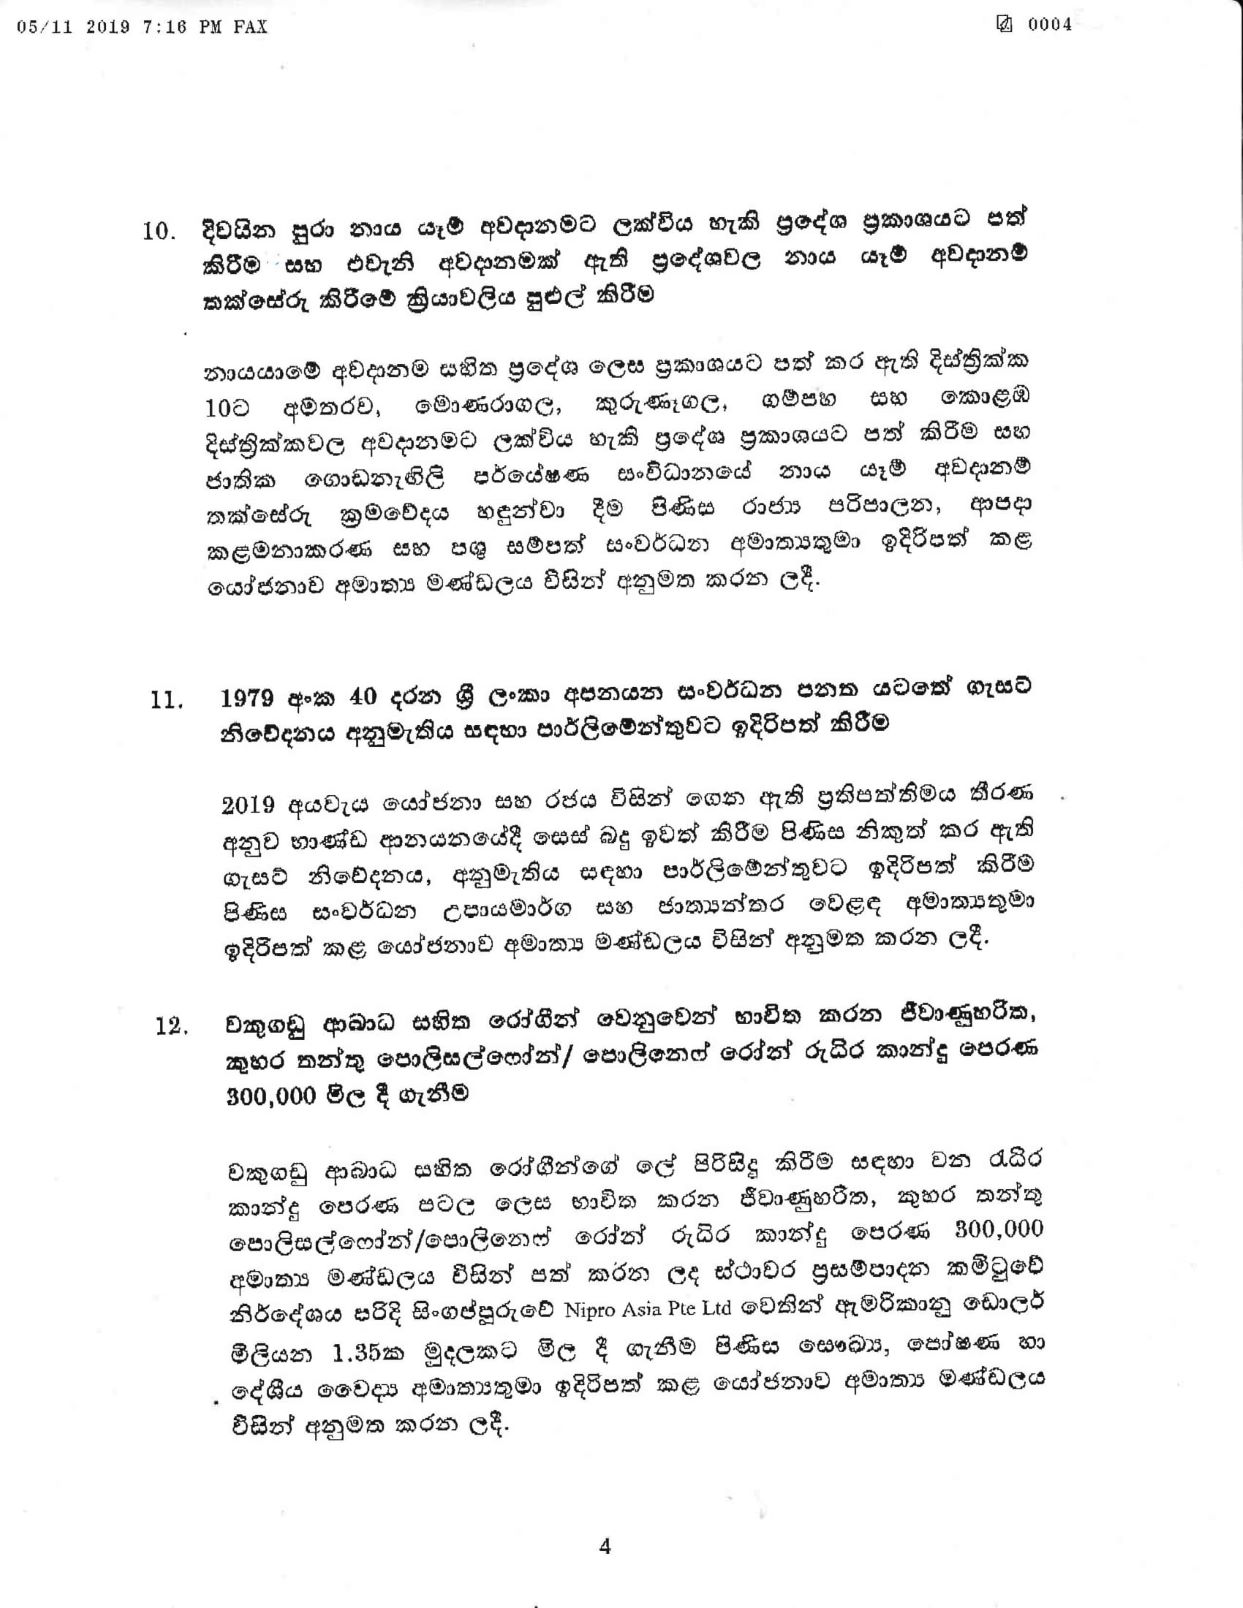 Cabinet Decision on 05.11.2019 04